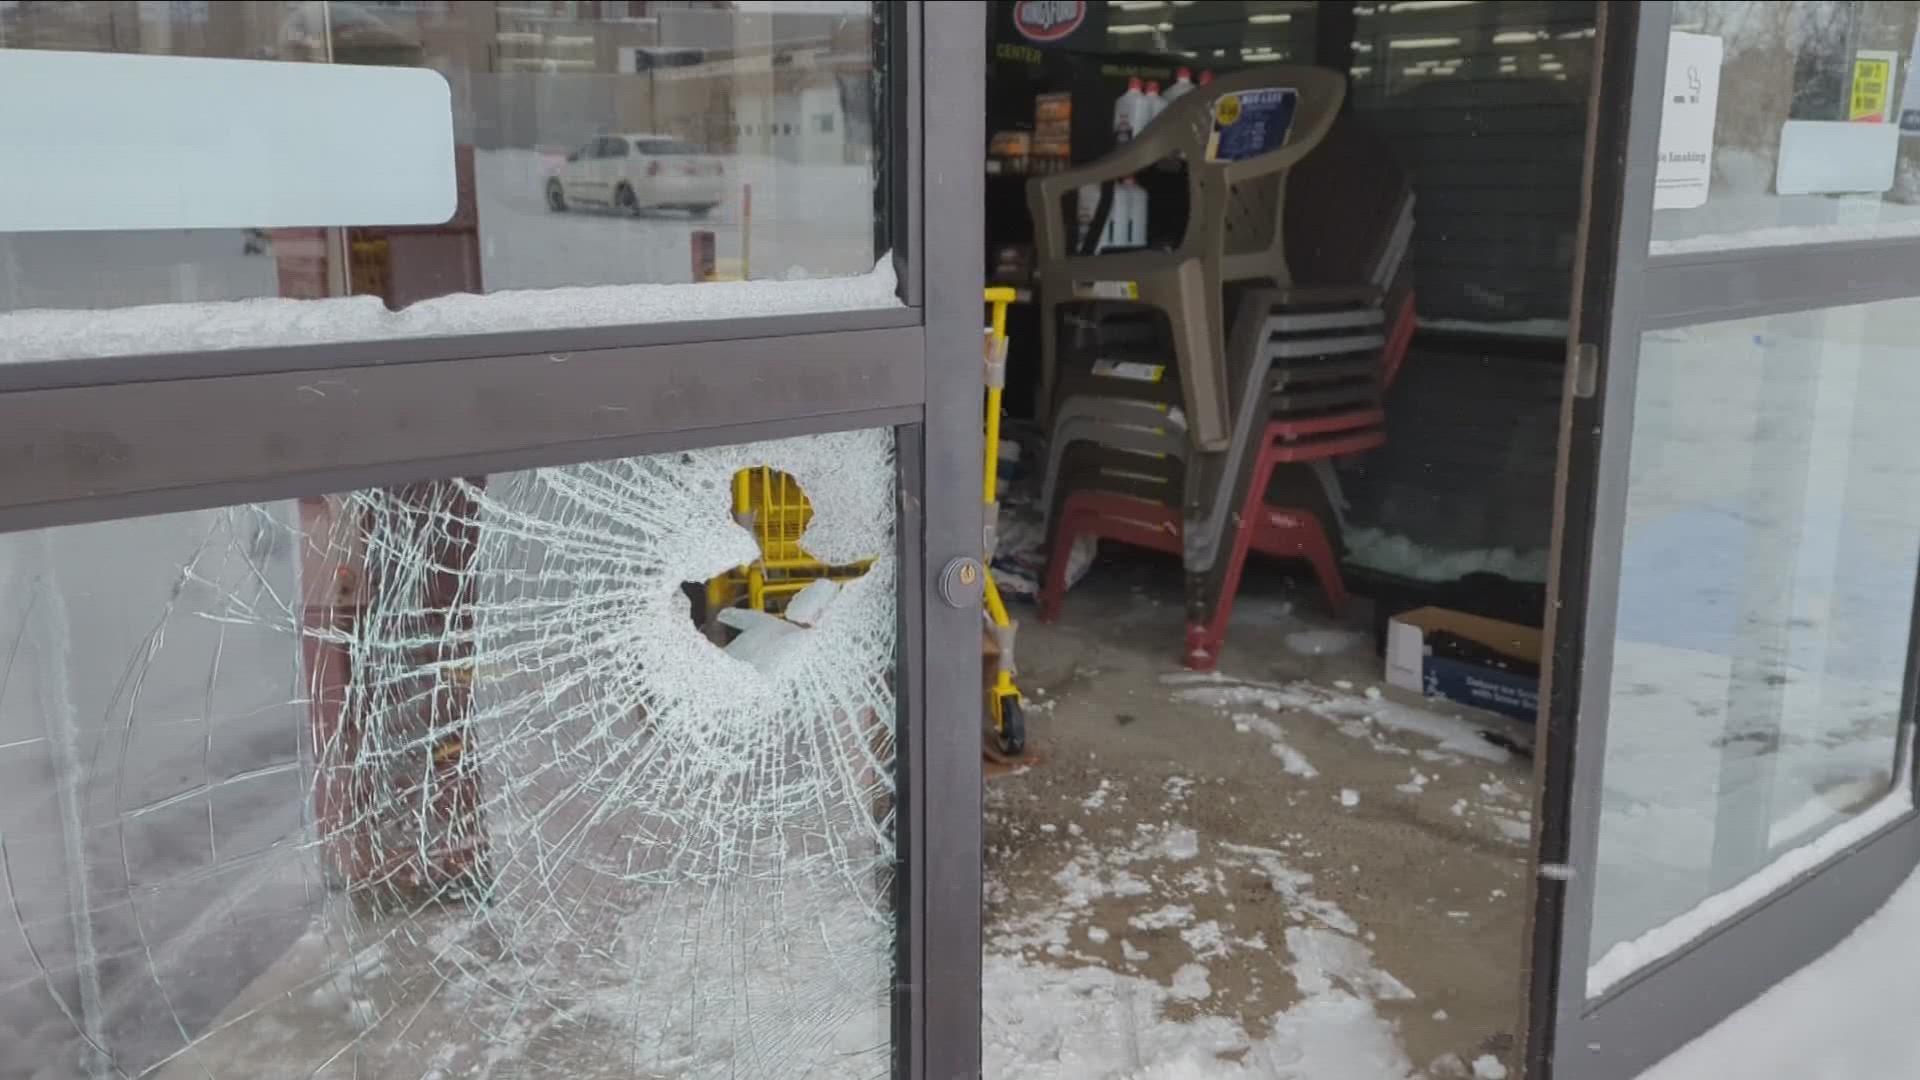 Buffalo police respond to reports of looting